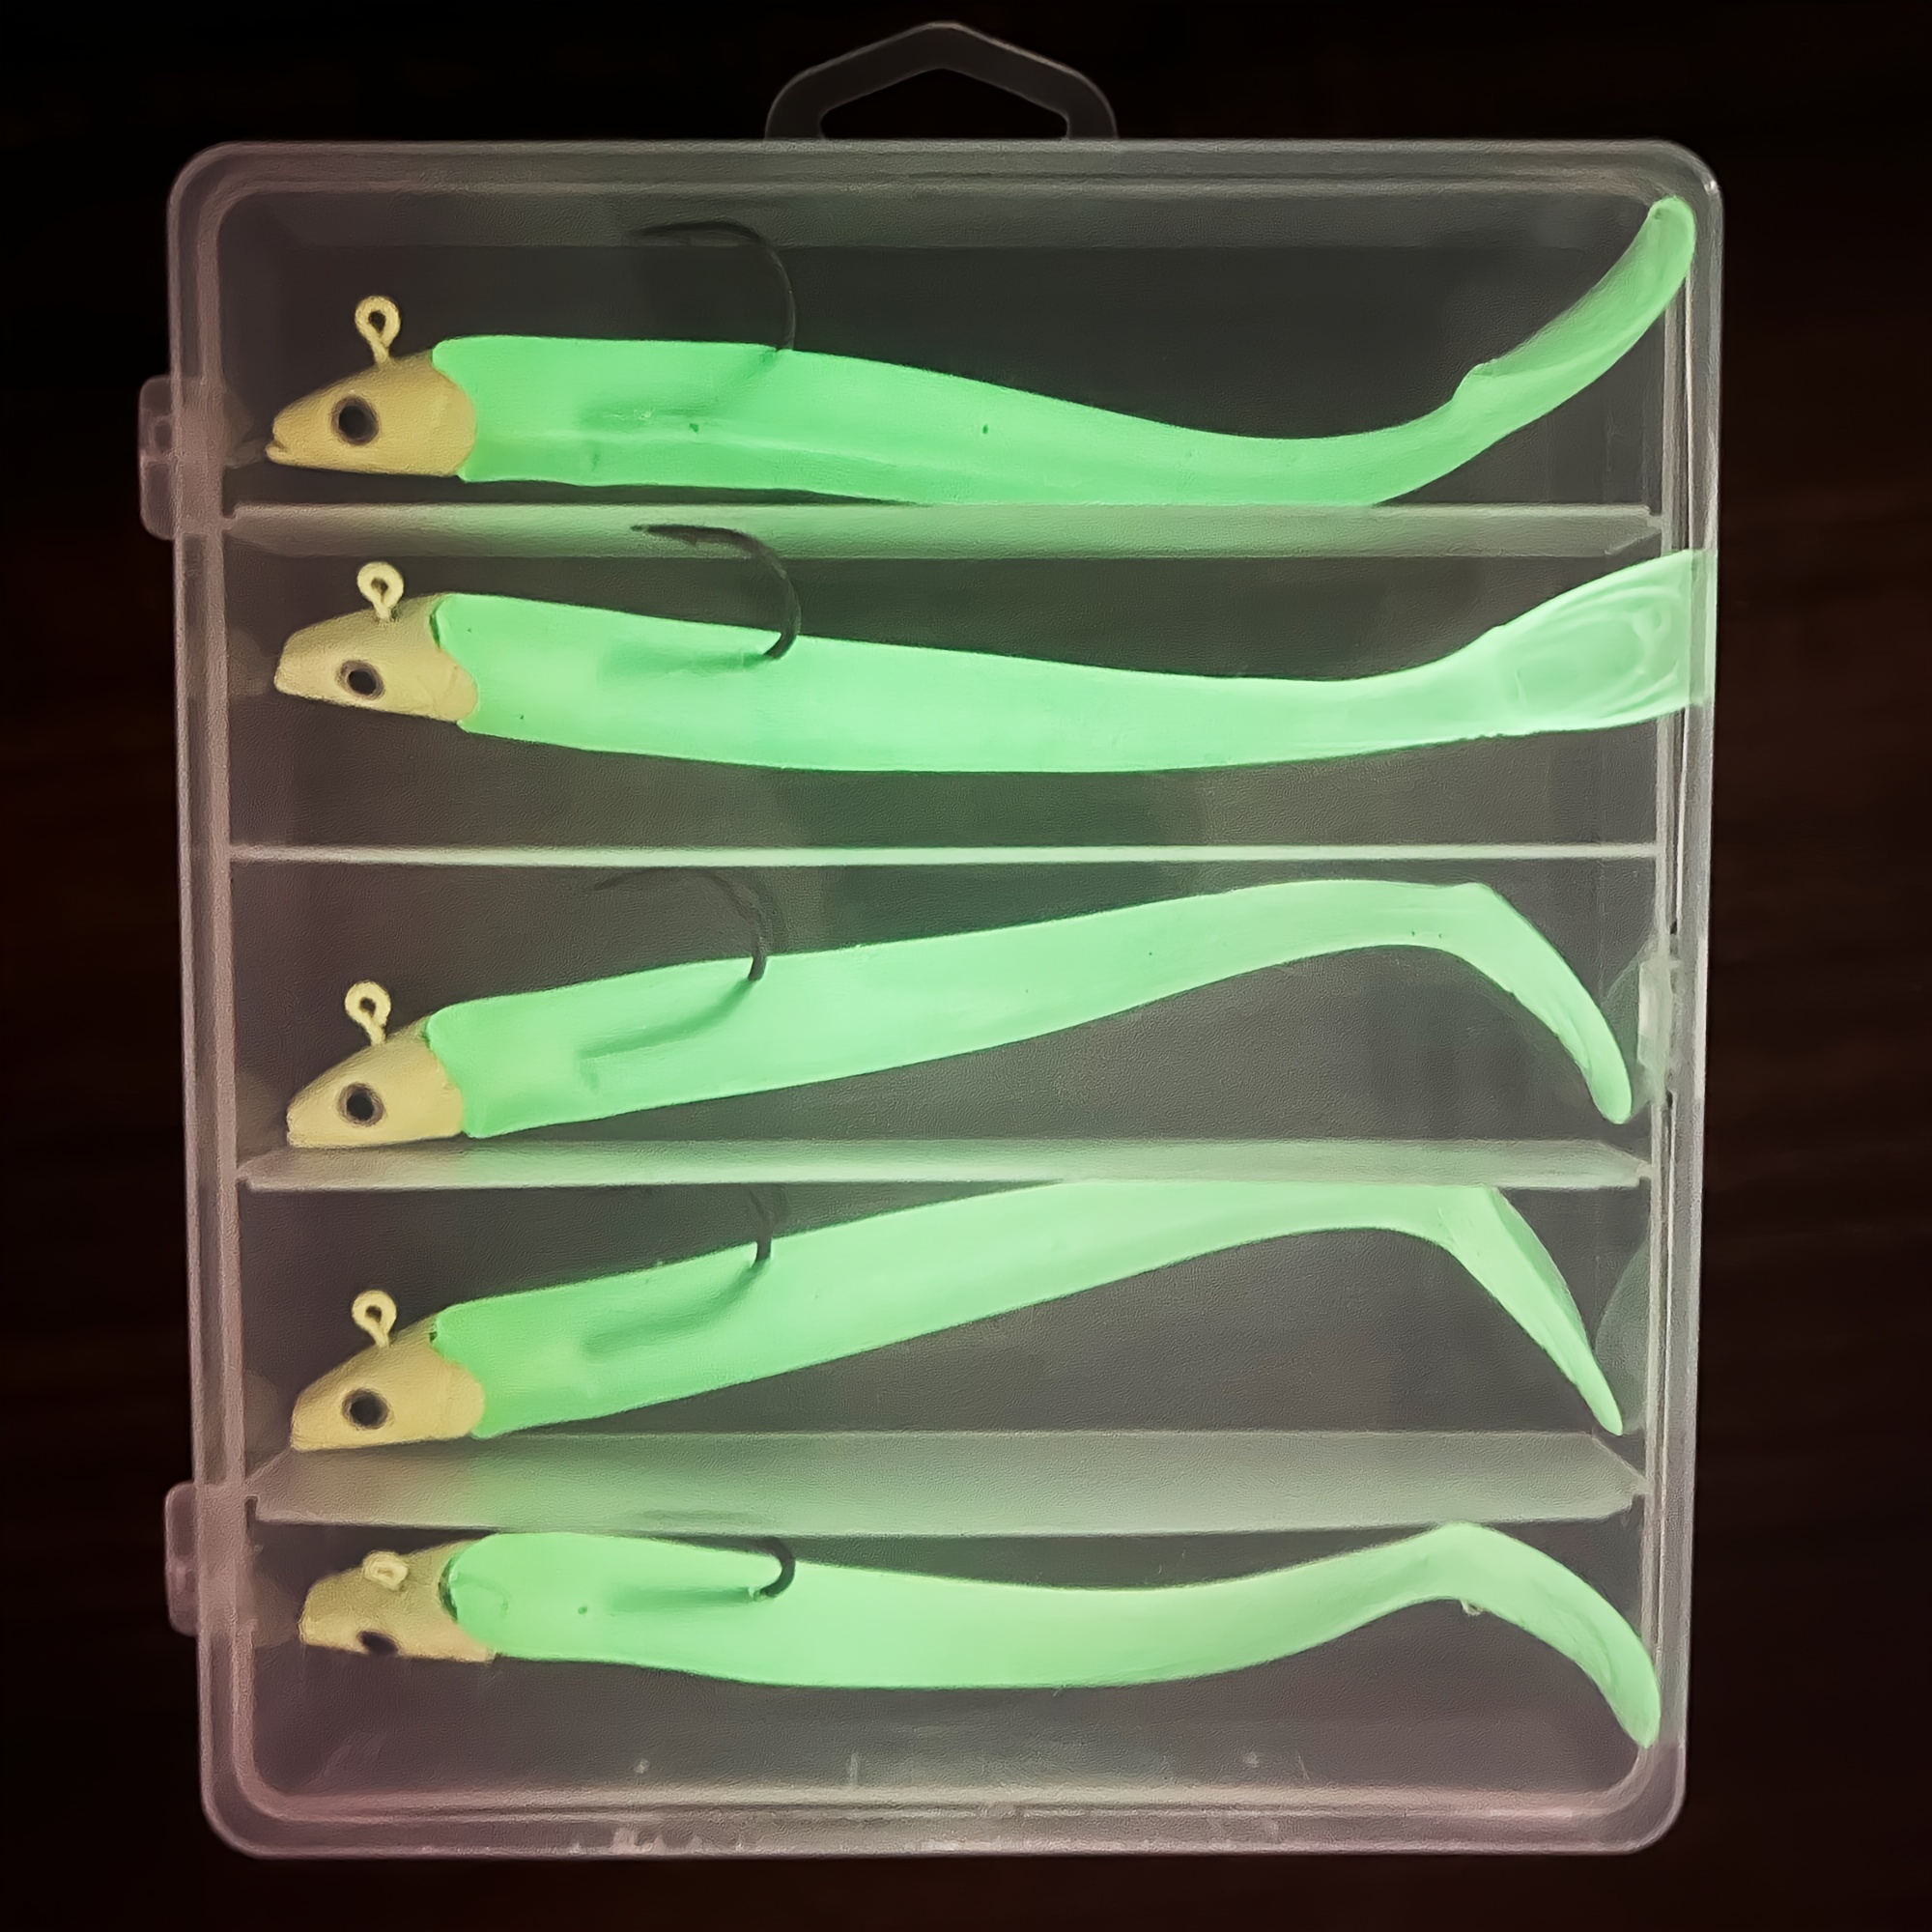 Jammas 6pcs/lot Paddle Tail Soft Grubs Glow in Dark T Tail Lure Jig Head Soft  Lure for Bass Fishing Mandarin Fishing, Soft Plastic Lures -  Canada